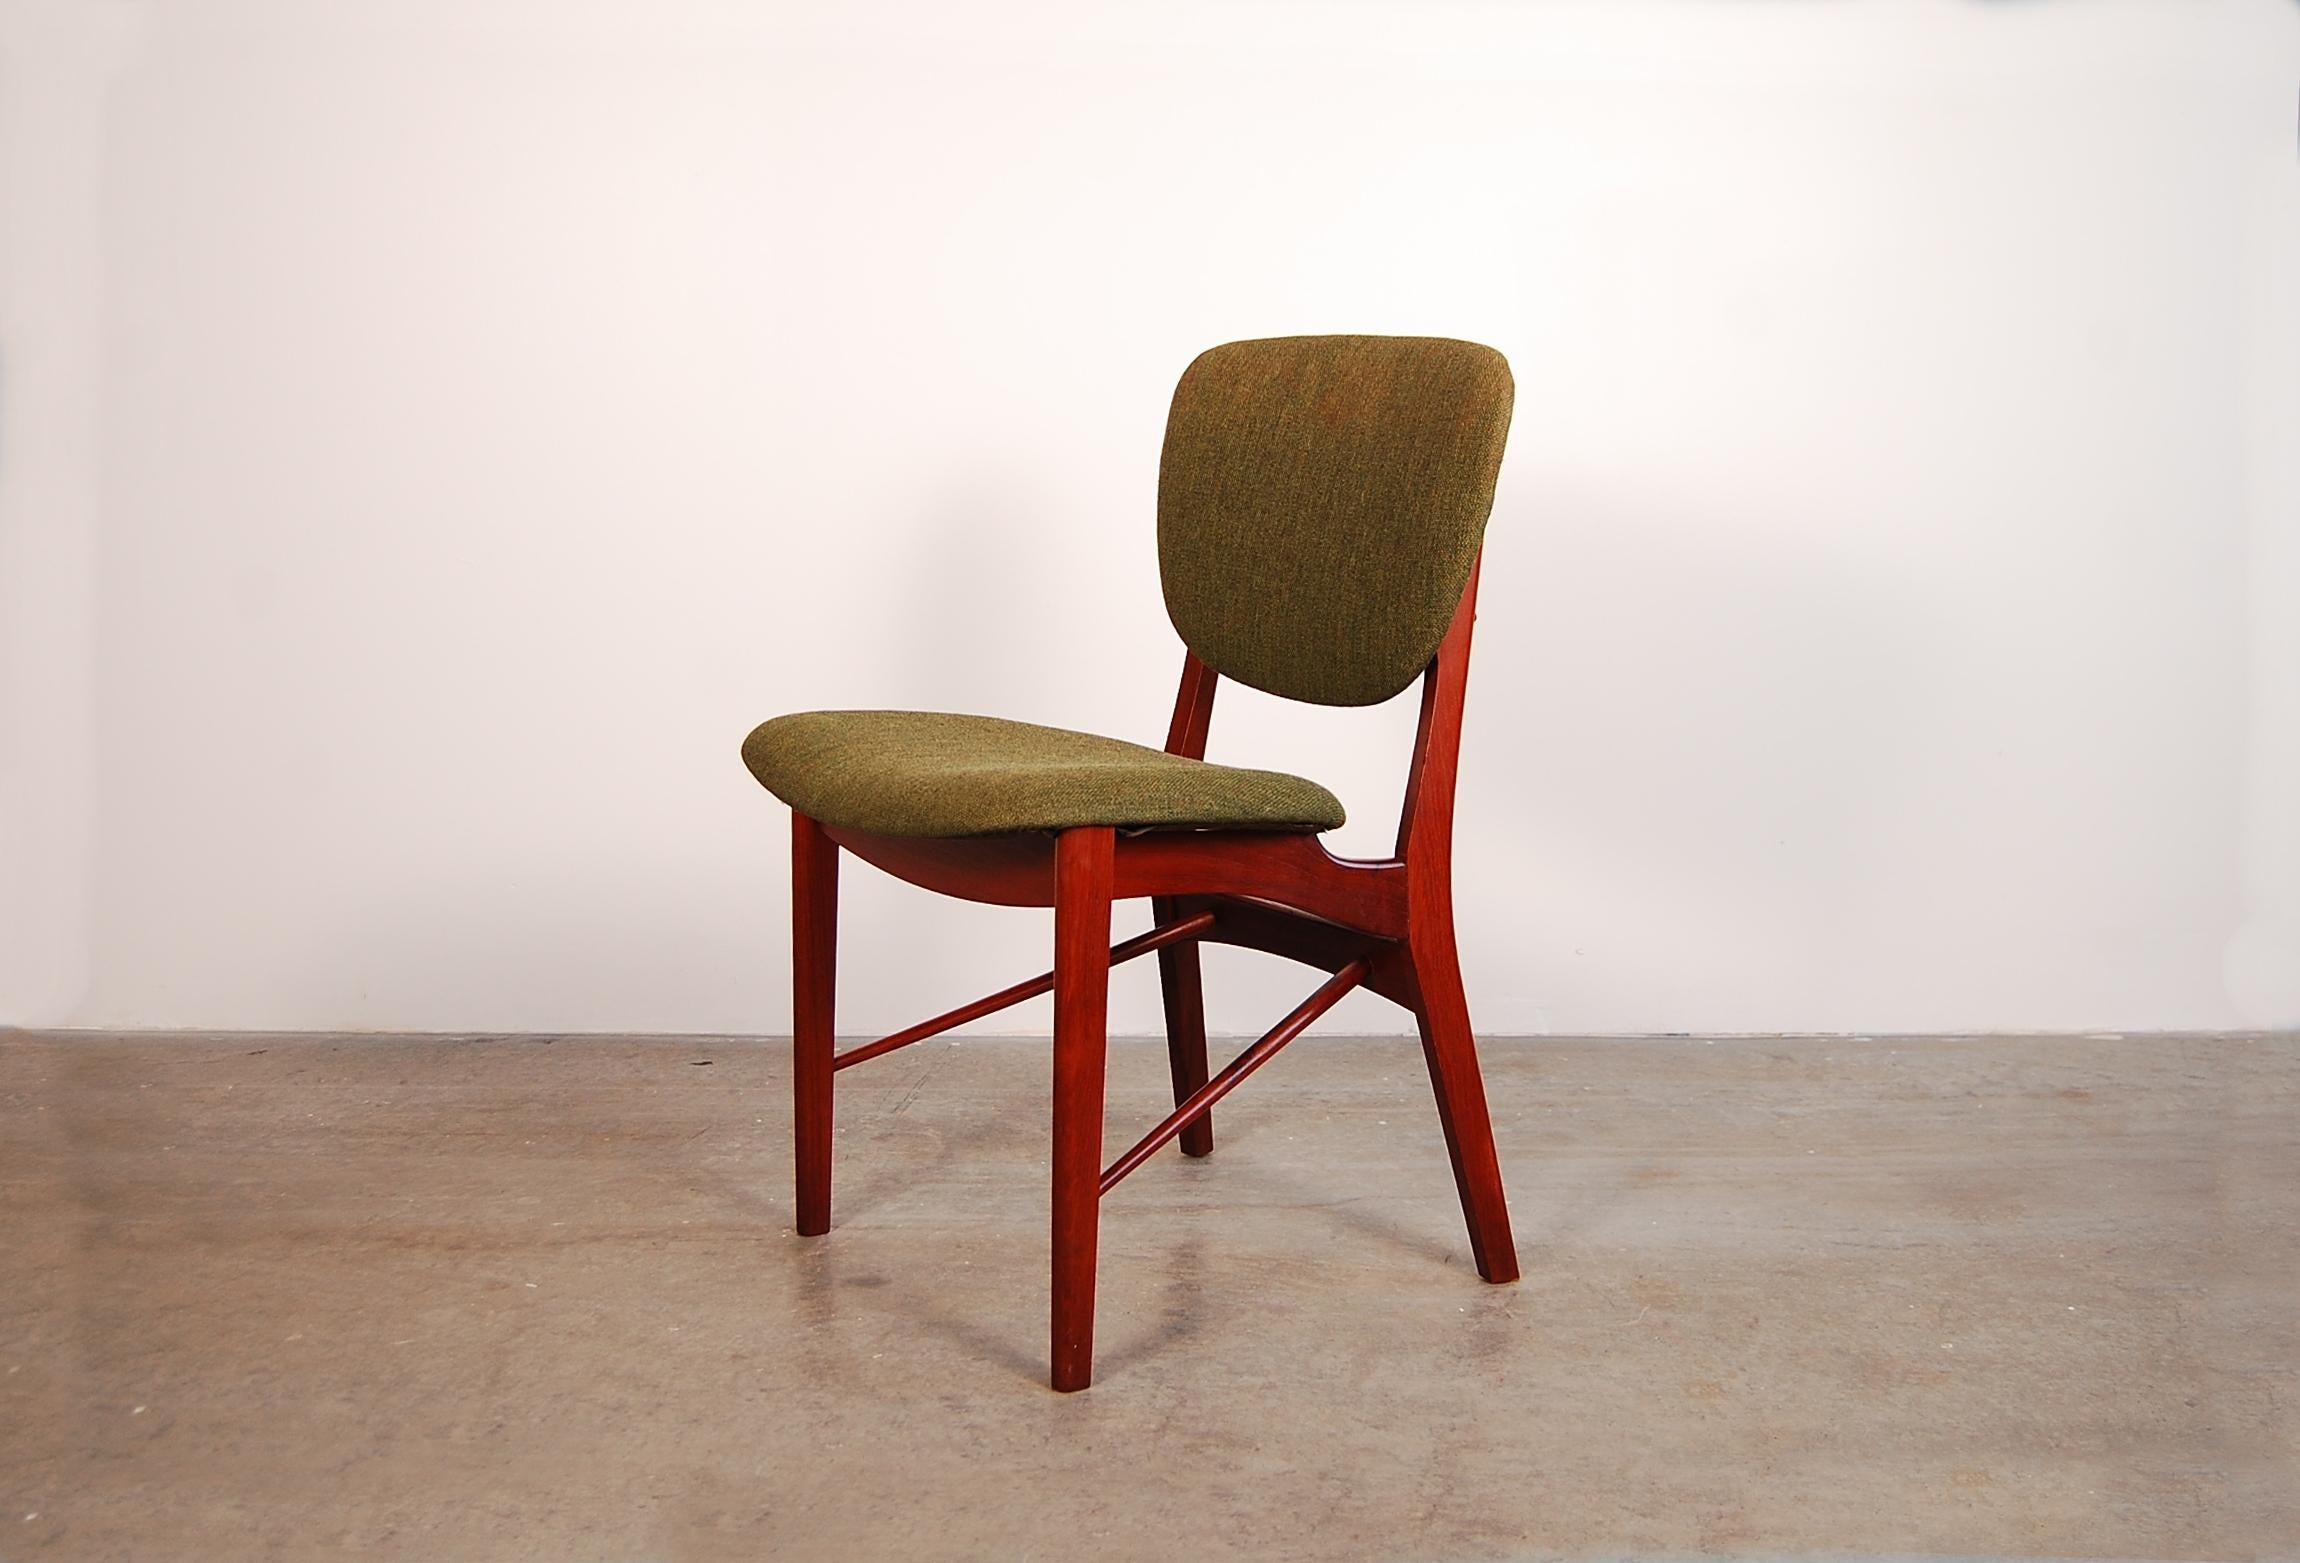 A single chair in teak, designed and produced by Niels Vodder of Copenhagen, Denmark, circa 1962. Most likely designed as a dining chair, but would be suitable as a desk chair. The green wool fabric appears to be original, and is in very good